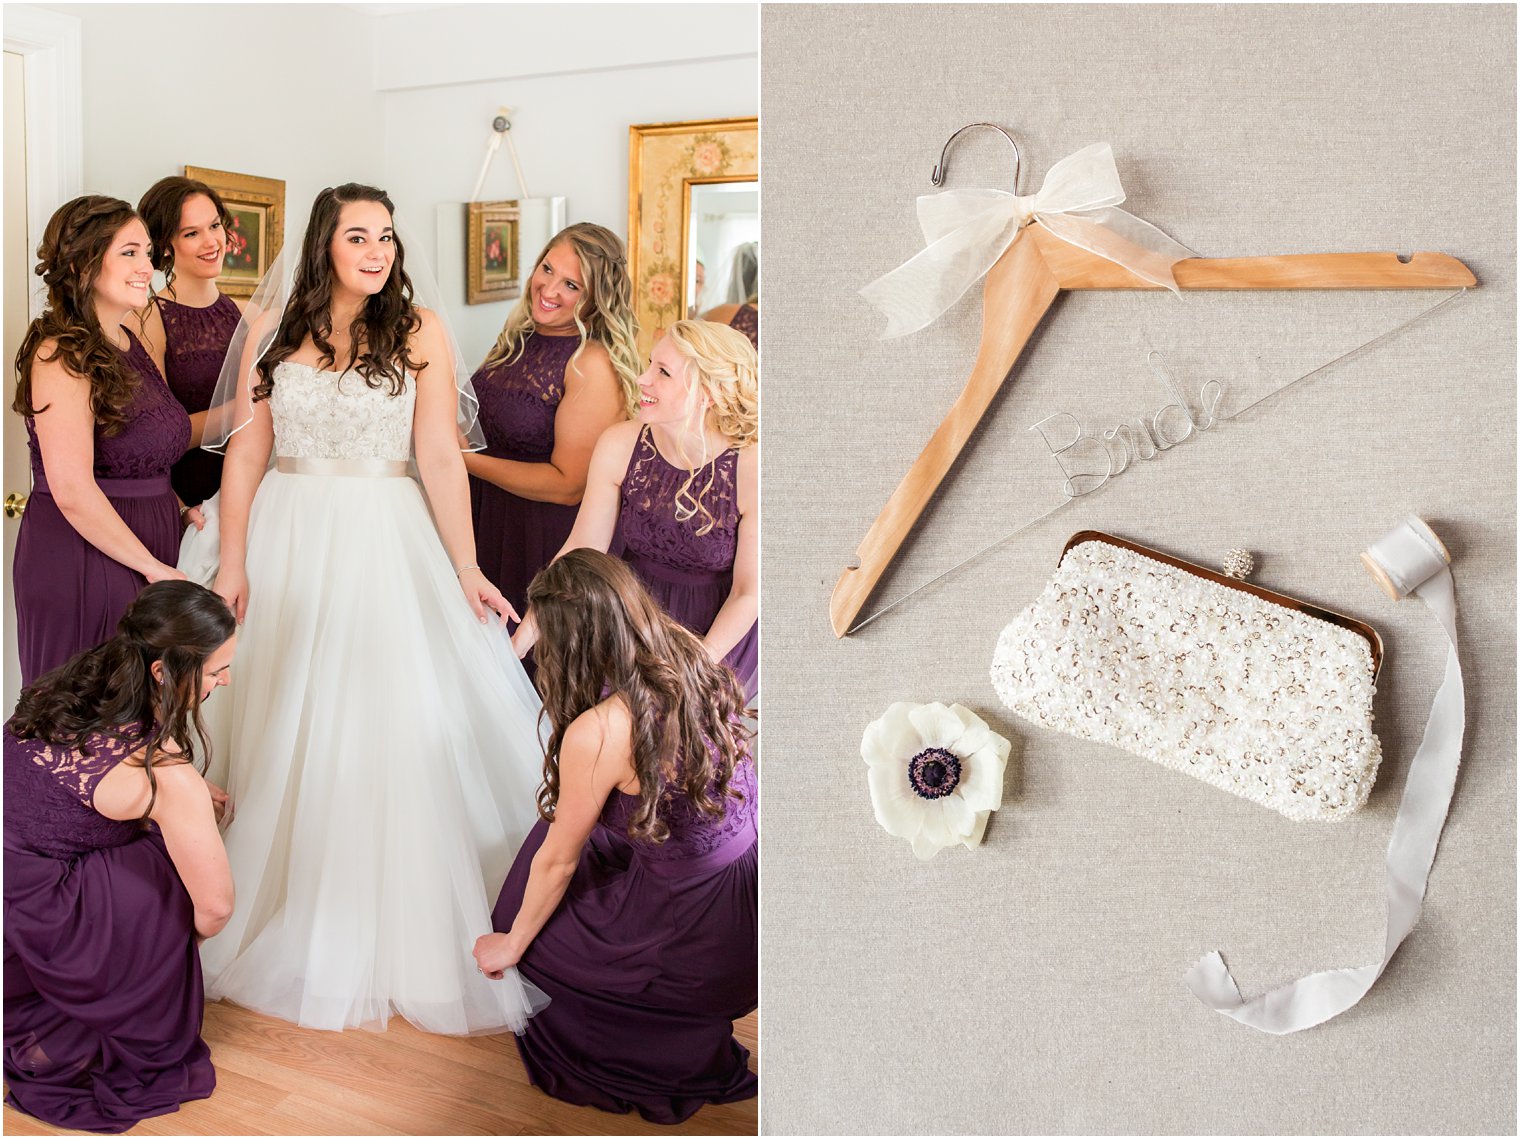 Bridesmaids helping bride get ready on her wedding day